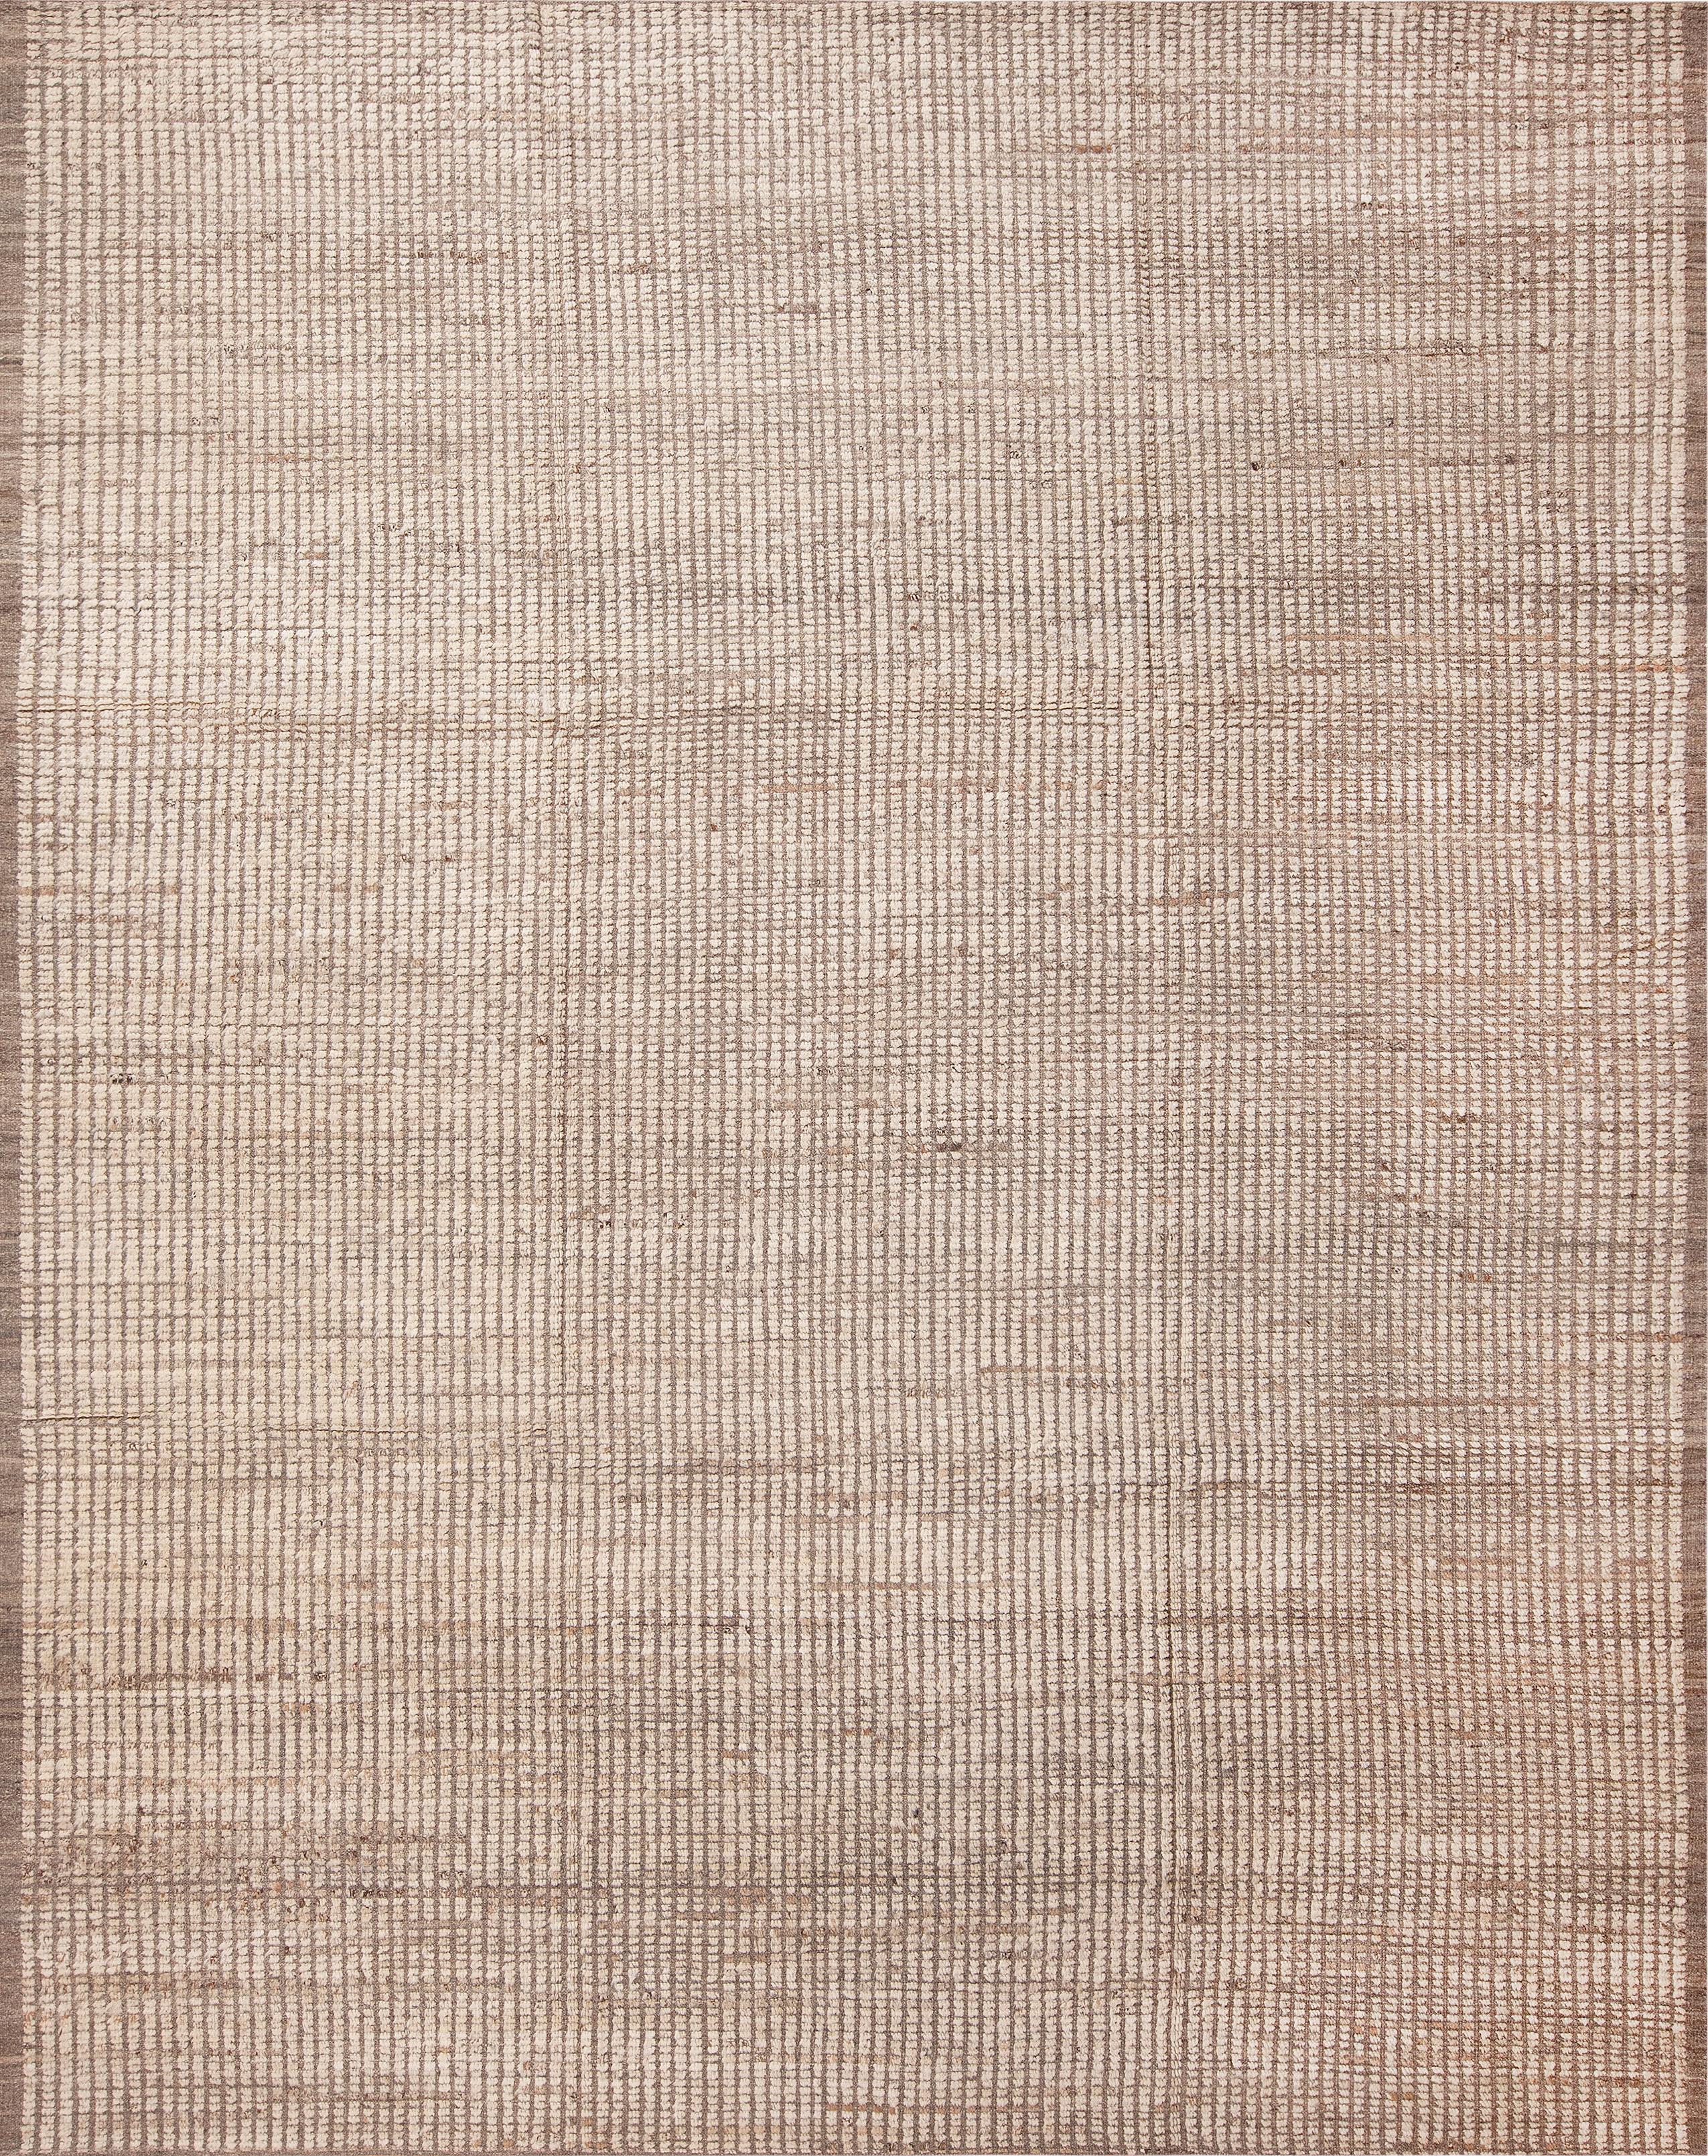 Calming Handmade Wool Pile Modern Contemporary Neutral Minimalist Area Rug, Country of origin: Central Asia, Circa date: Modern Rugs